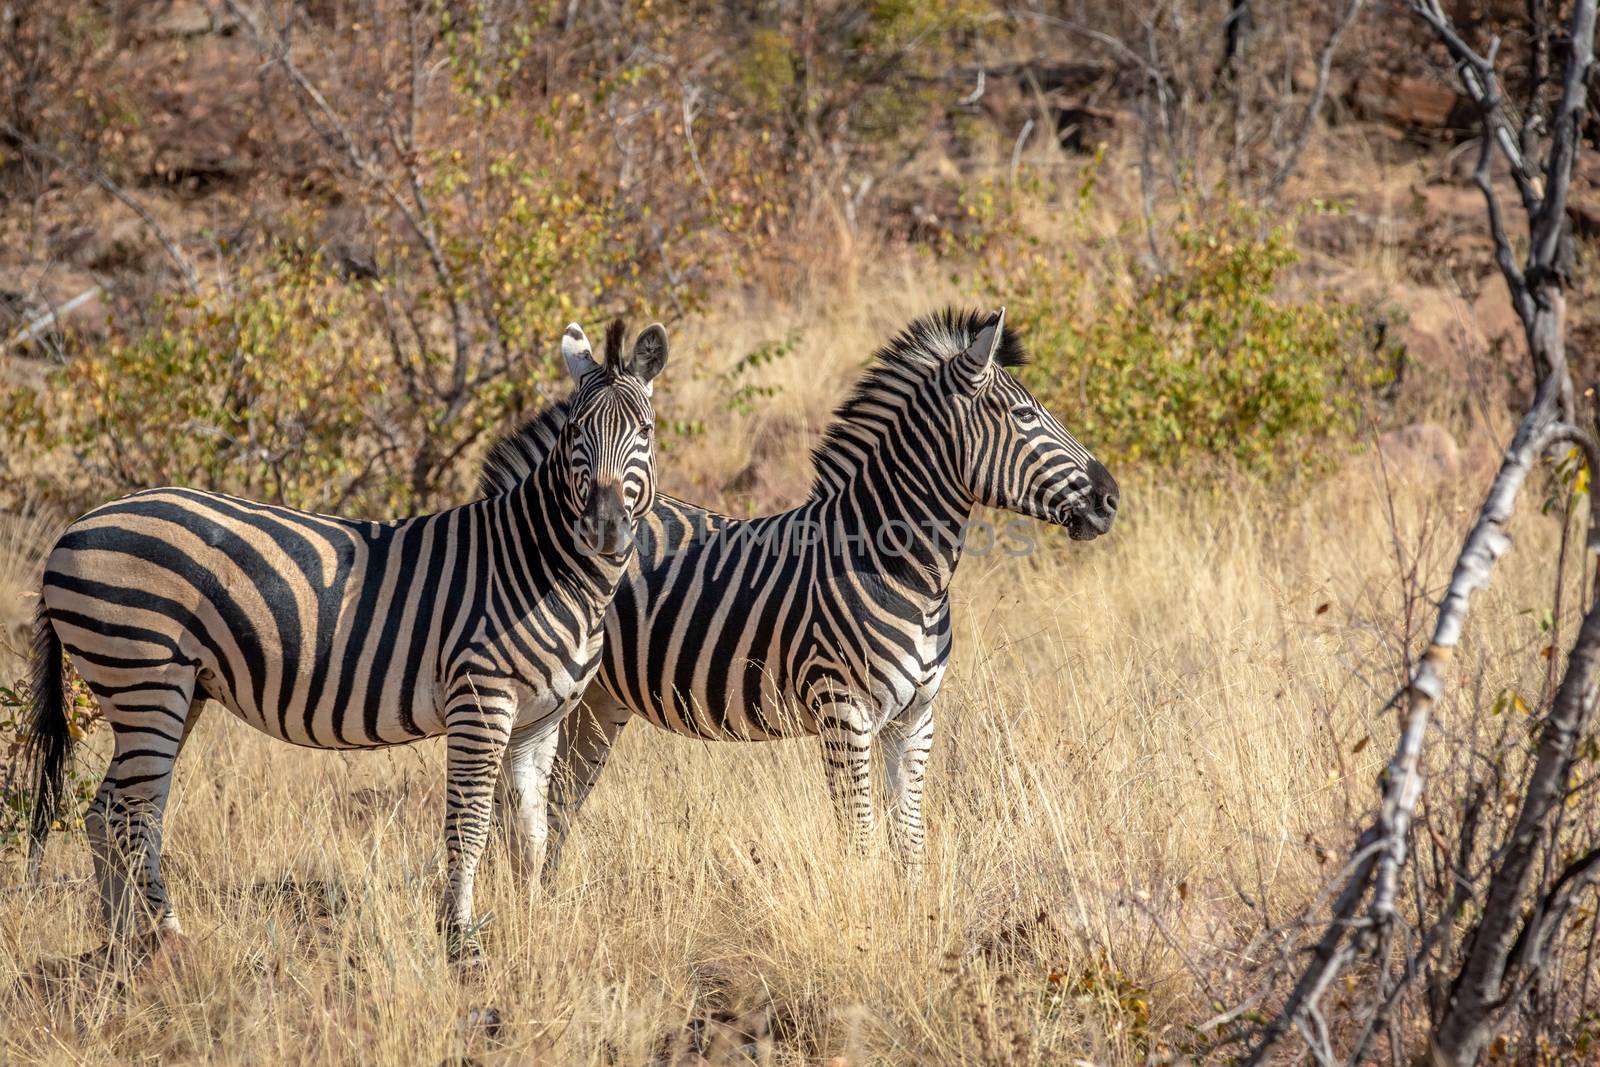 Two Zebras standing in the grass in the Welgevonden game reserve, South Africa.